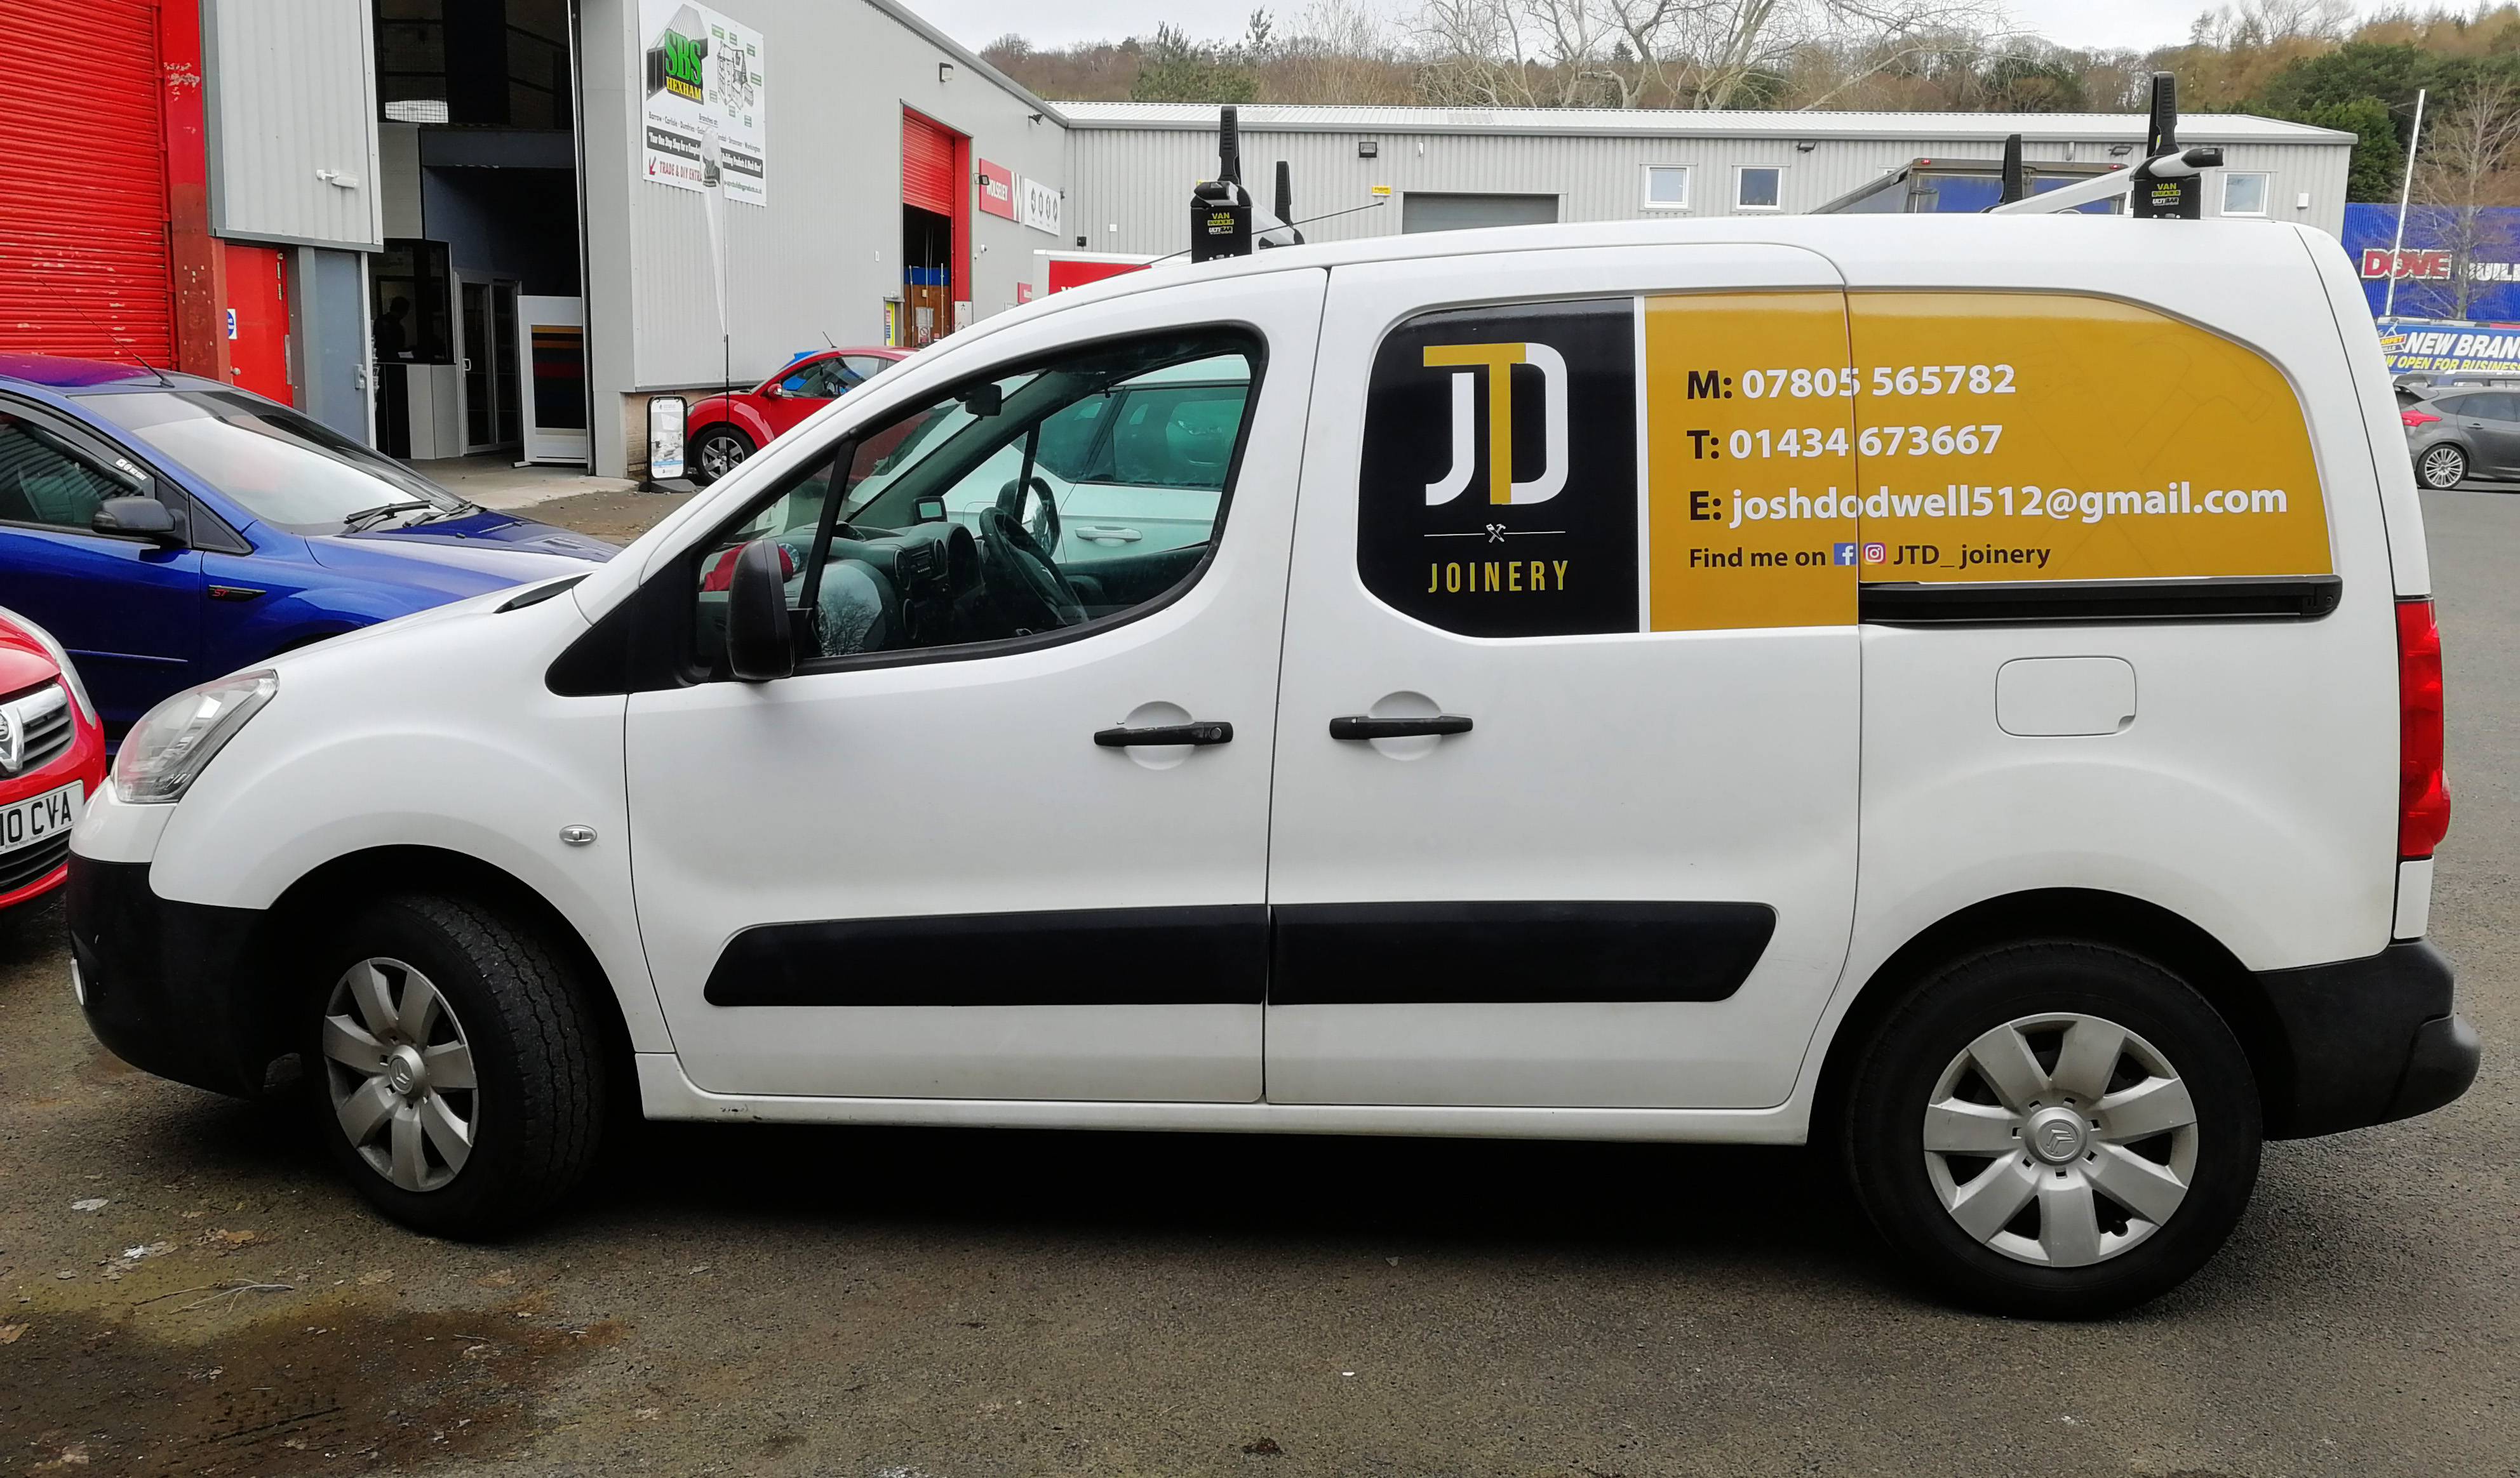 JD Joinery